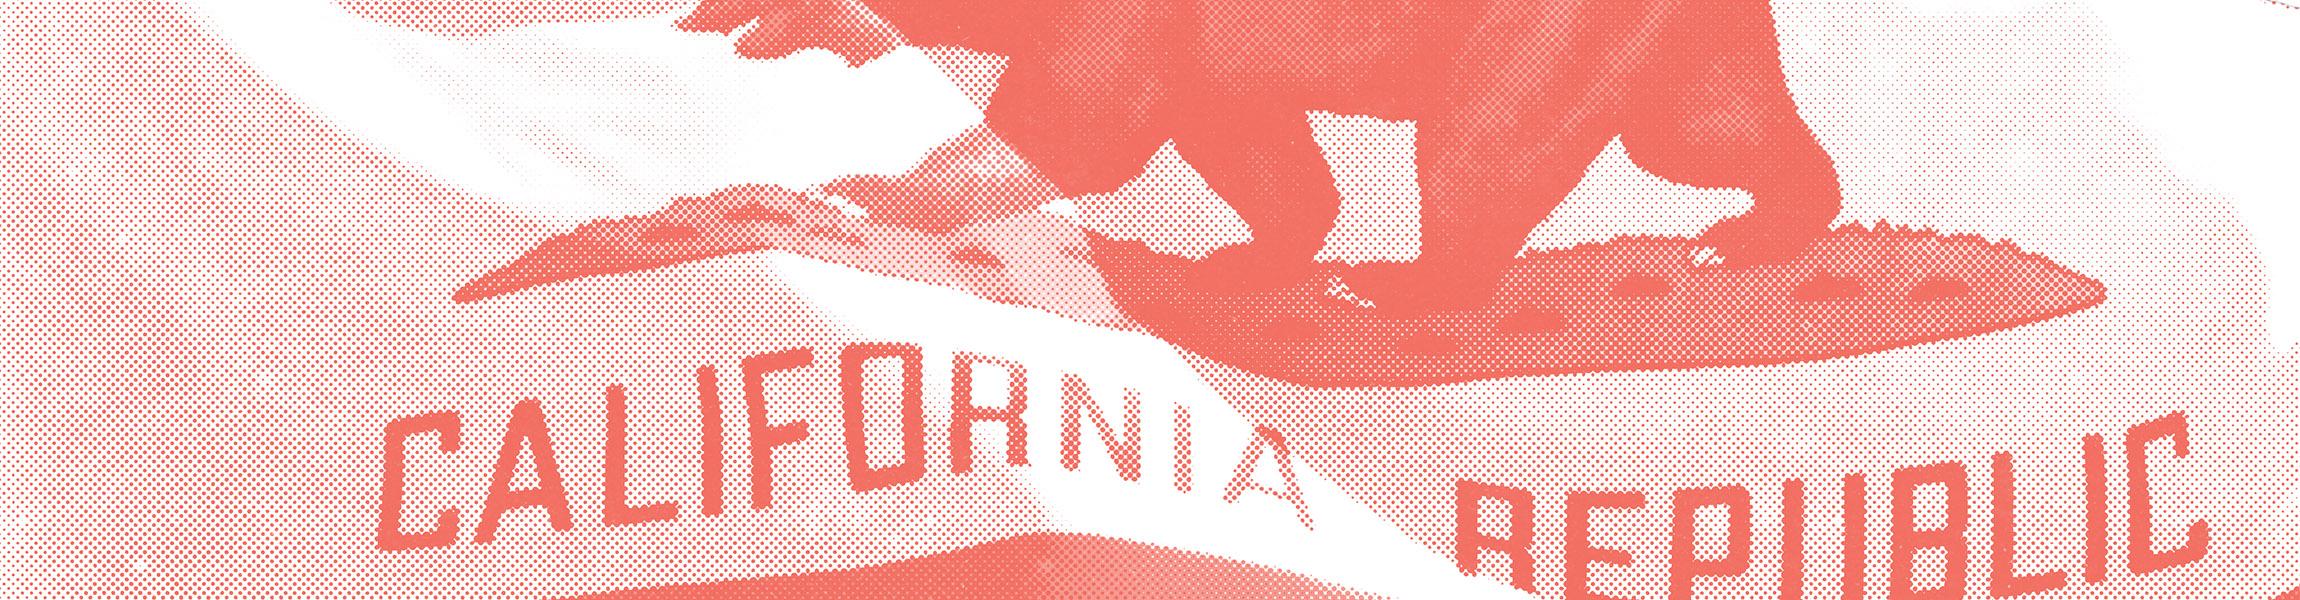 Close-up of the California flag overlaid in red. The text "California Republic" and the bottom half of the bear is visible.